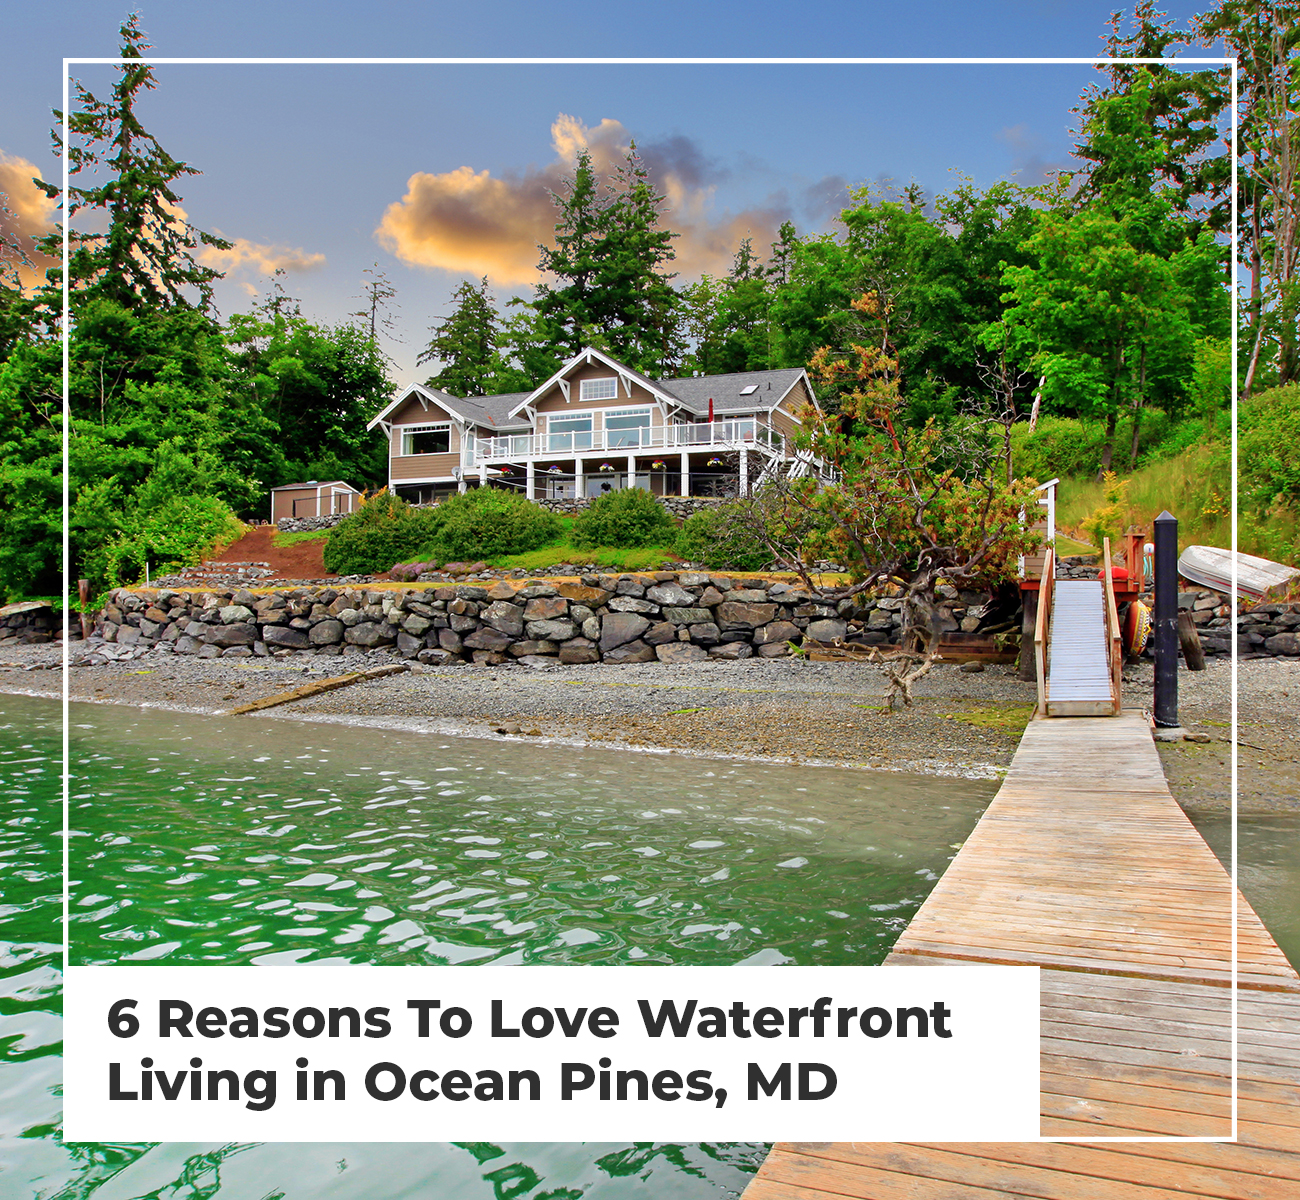 6 Reasons To Love Waterfront Living in Ocean Pines, MD